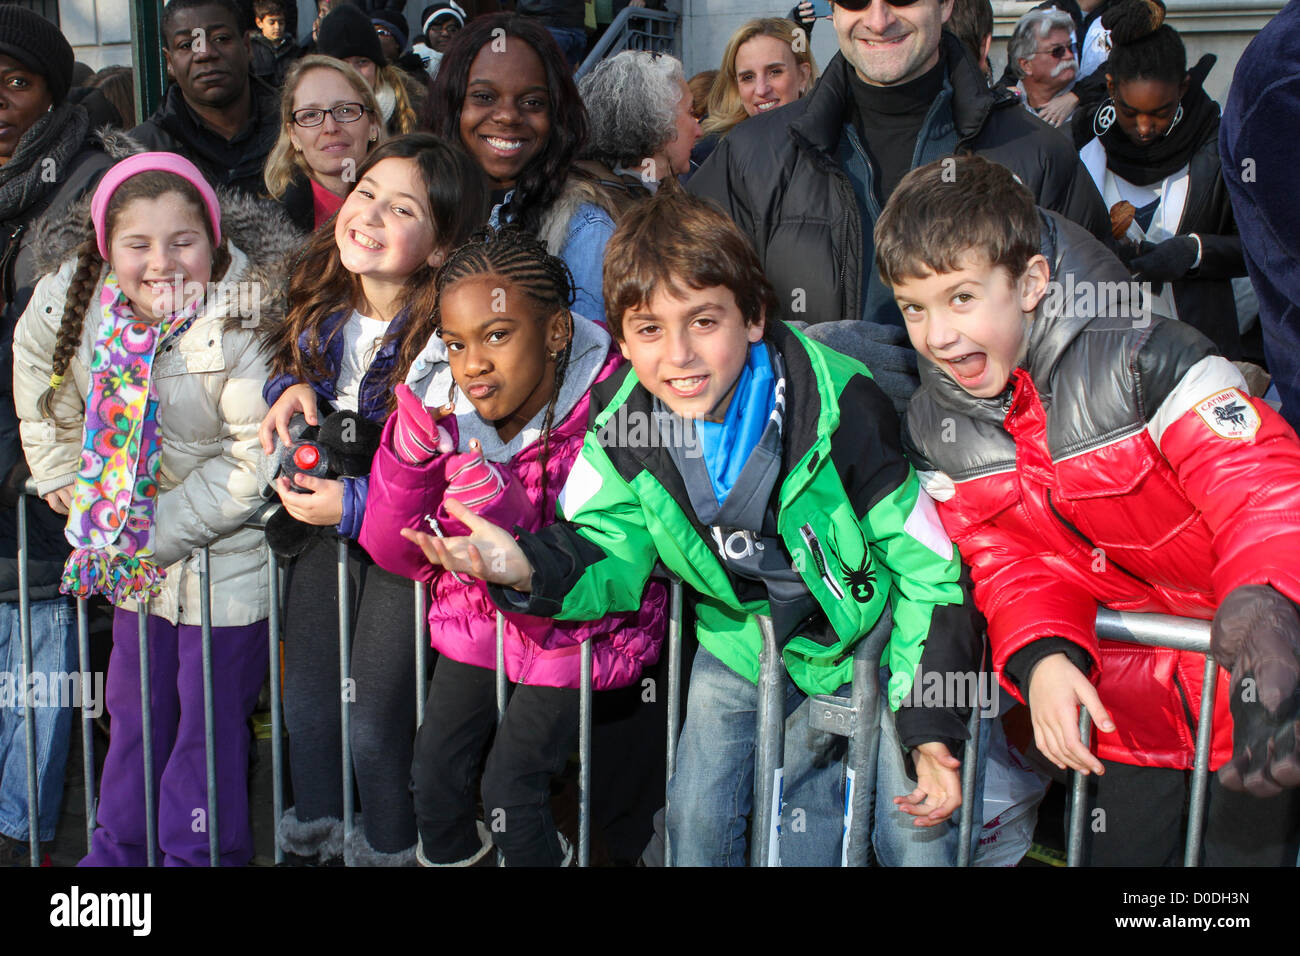 Young spectators crowd Central Park West to watch Macy's Thanksgiving Day Parade in New York City, on Thursday, Nov. 22, 2012. Stock Photo